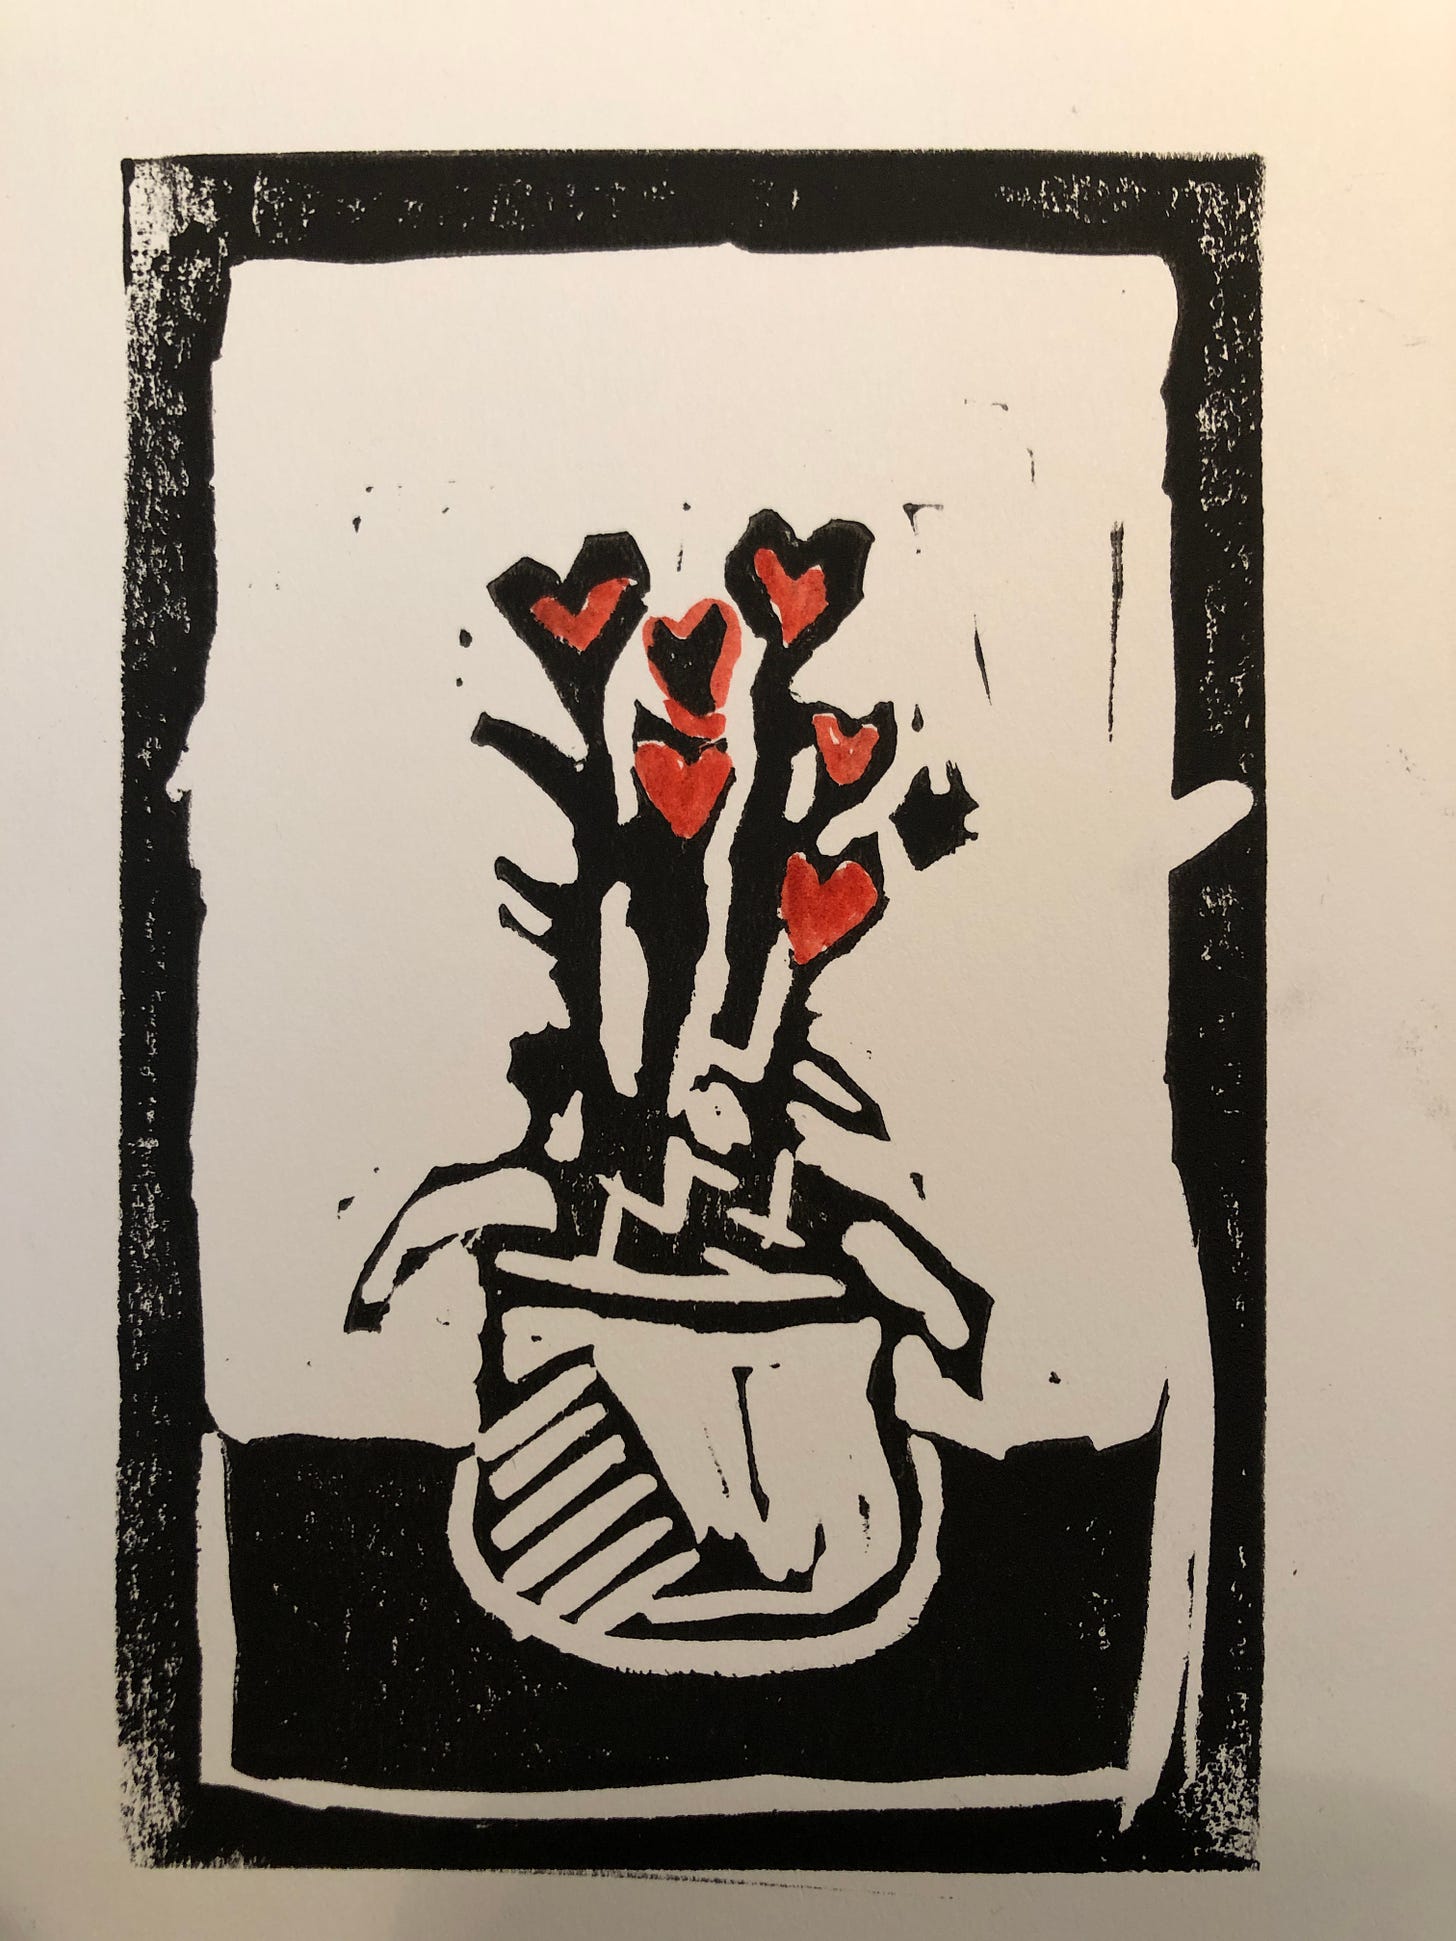 A black and red stamp of a potted plant with hearts at the top of the plant.